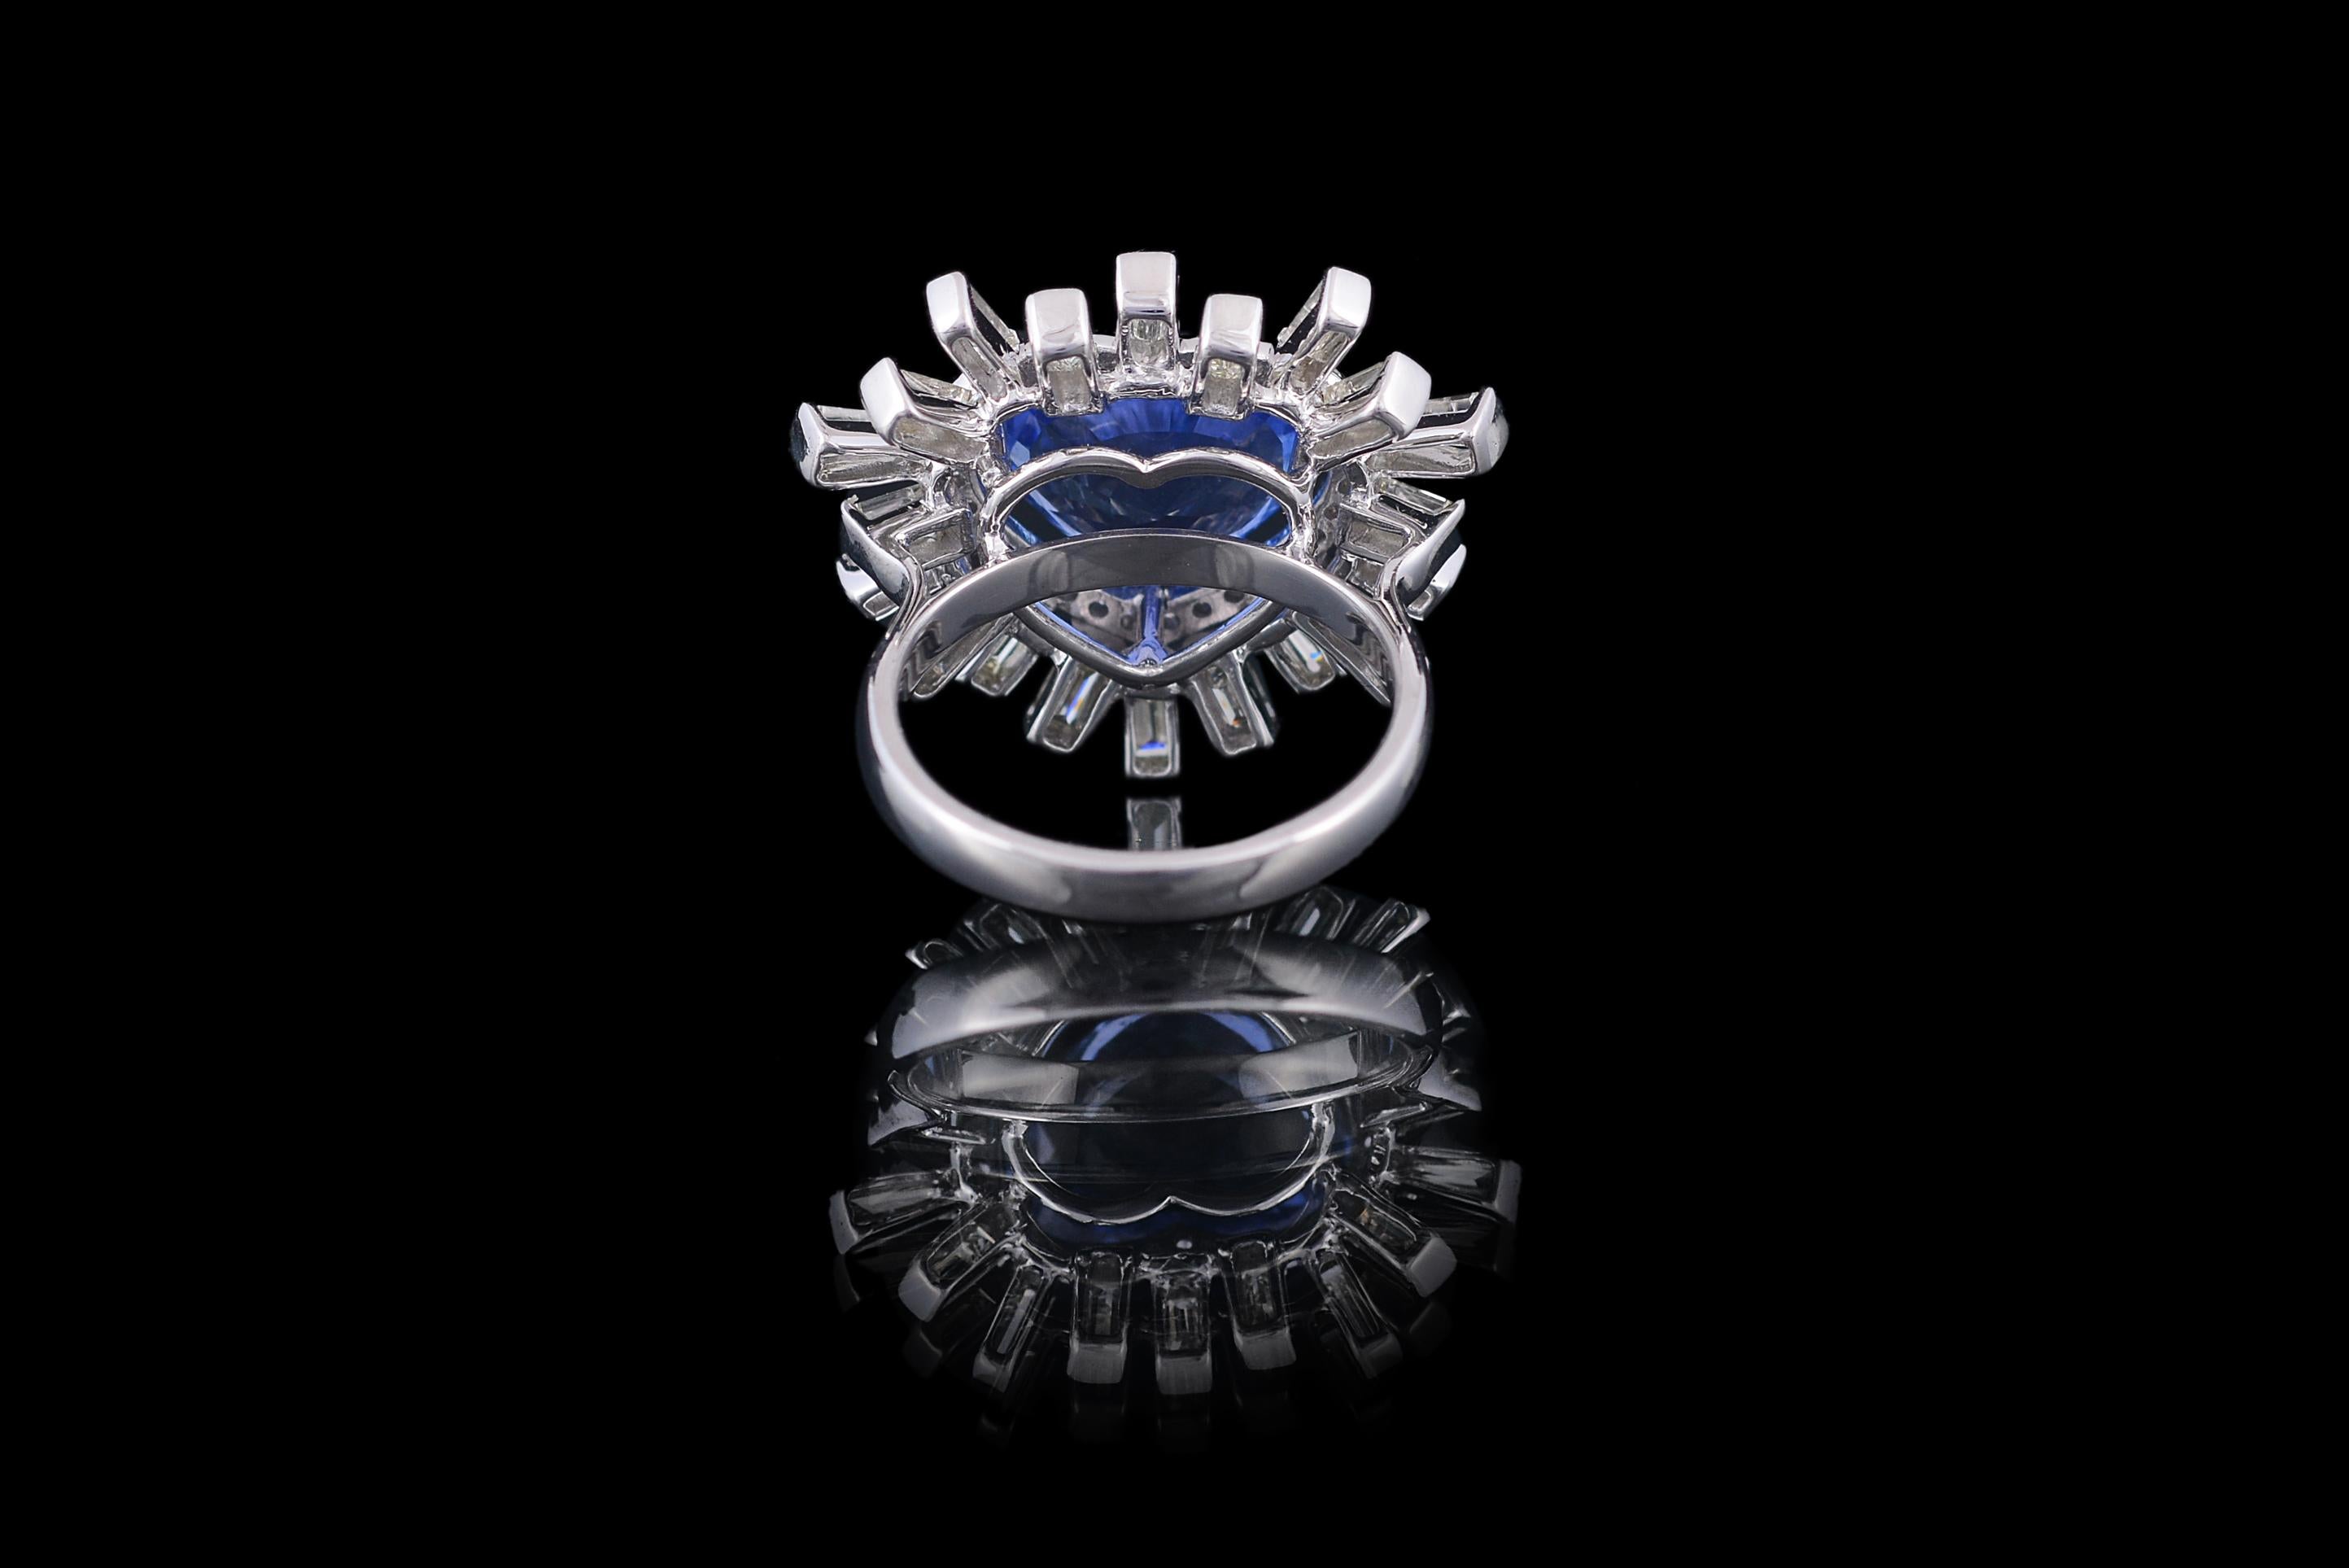 Gorgeously set in 18K white gold, a 6.06 carats blue sapphire and baguette diamonds cocktail ring. The Sapphire is from Sri Lanka and weighs 6.06 carats. The weight of the baguette diamonds is 1.59 carats. The ring is made in Indian ring size 12 (US